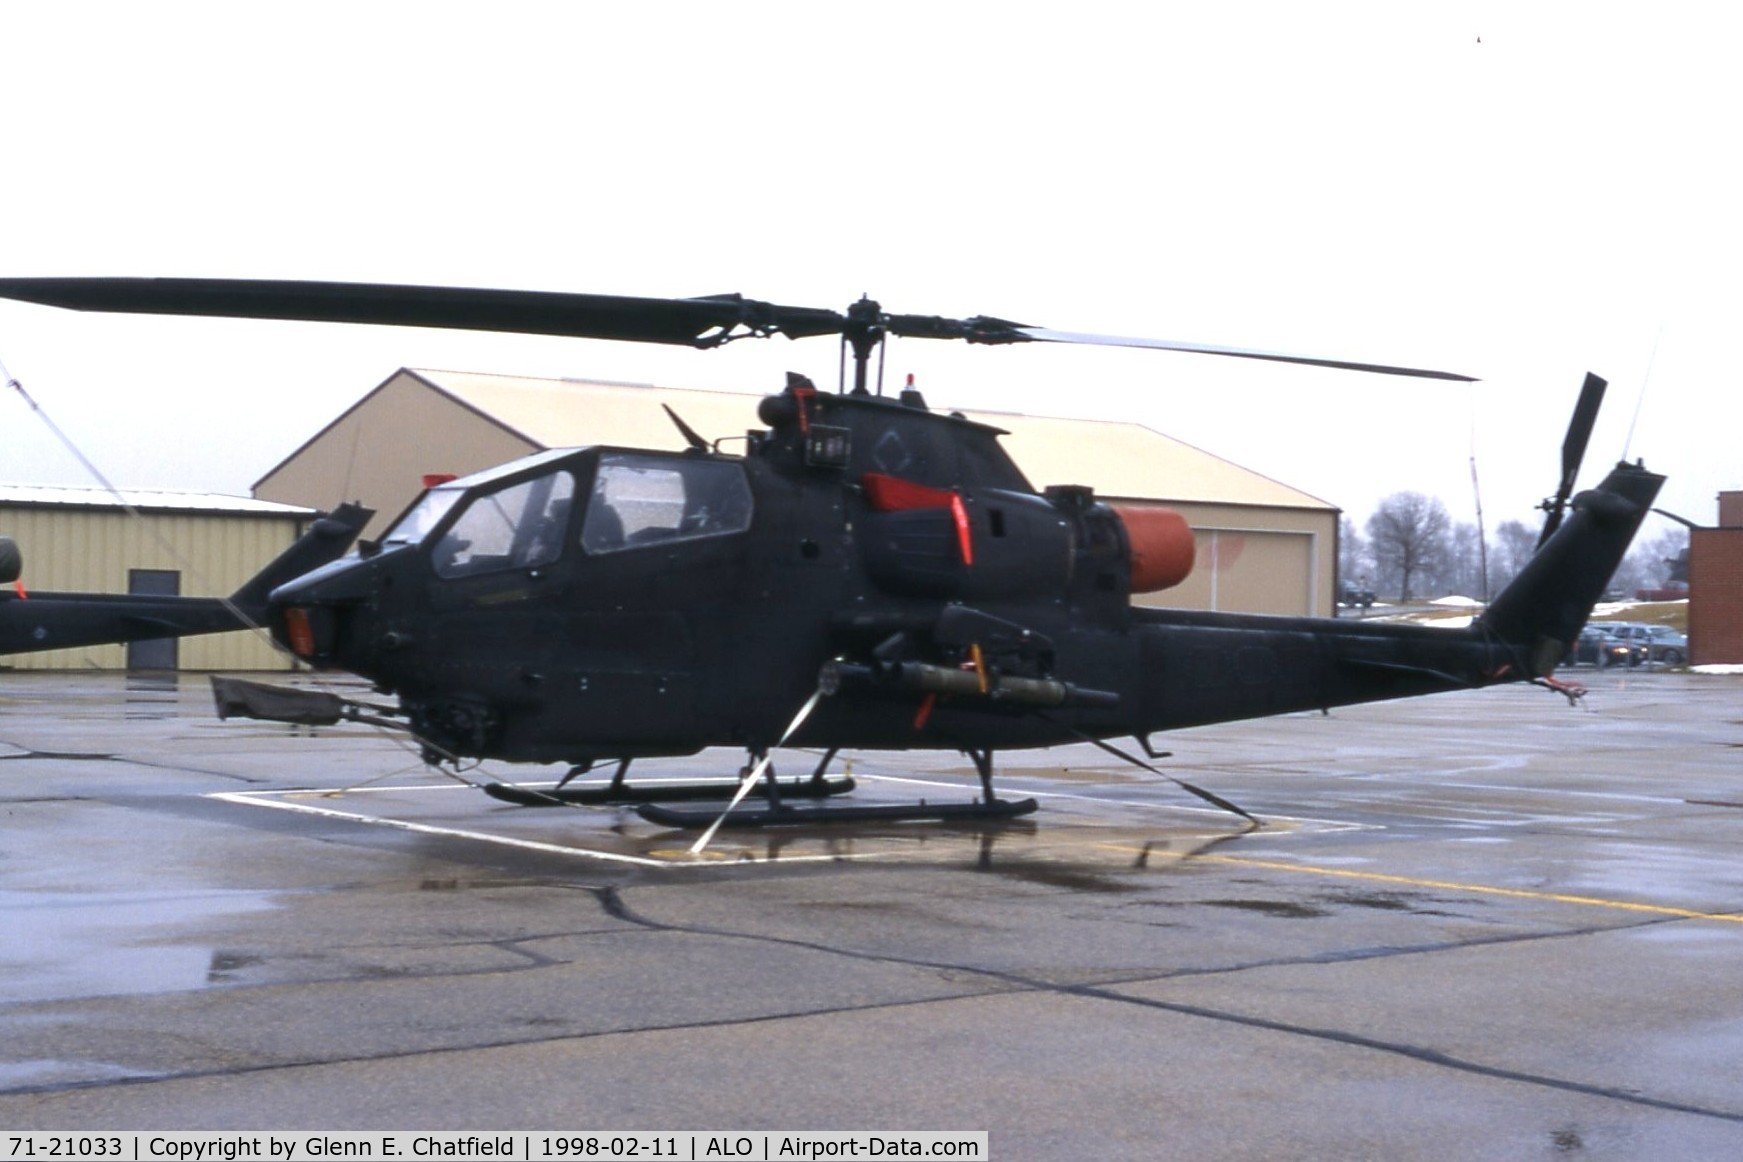 71-21033, 1971 Bell AH-1F Cobra C/N 21104, AH-1F of the Iowa National Guard, taken during freezing drizzle.  Now at a Veteran's Memorial in Henderson, NY